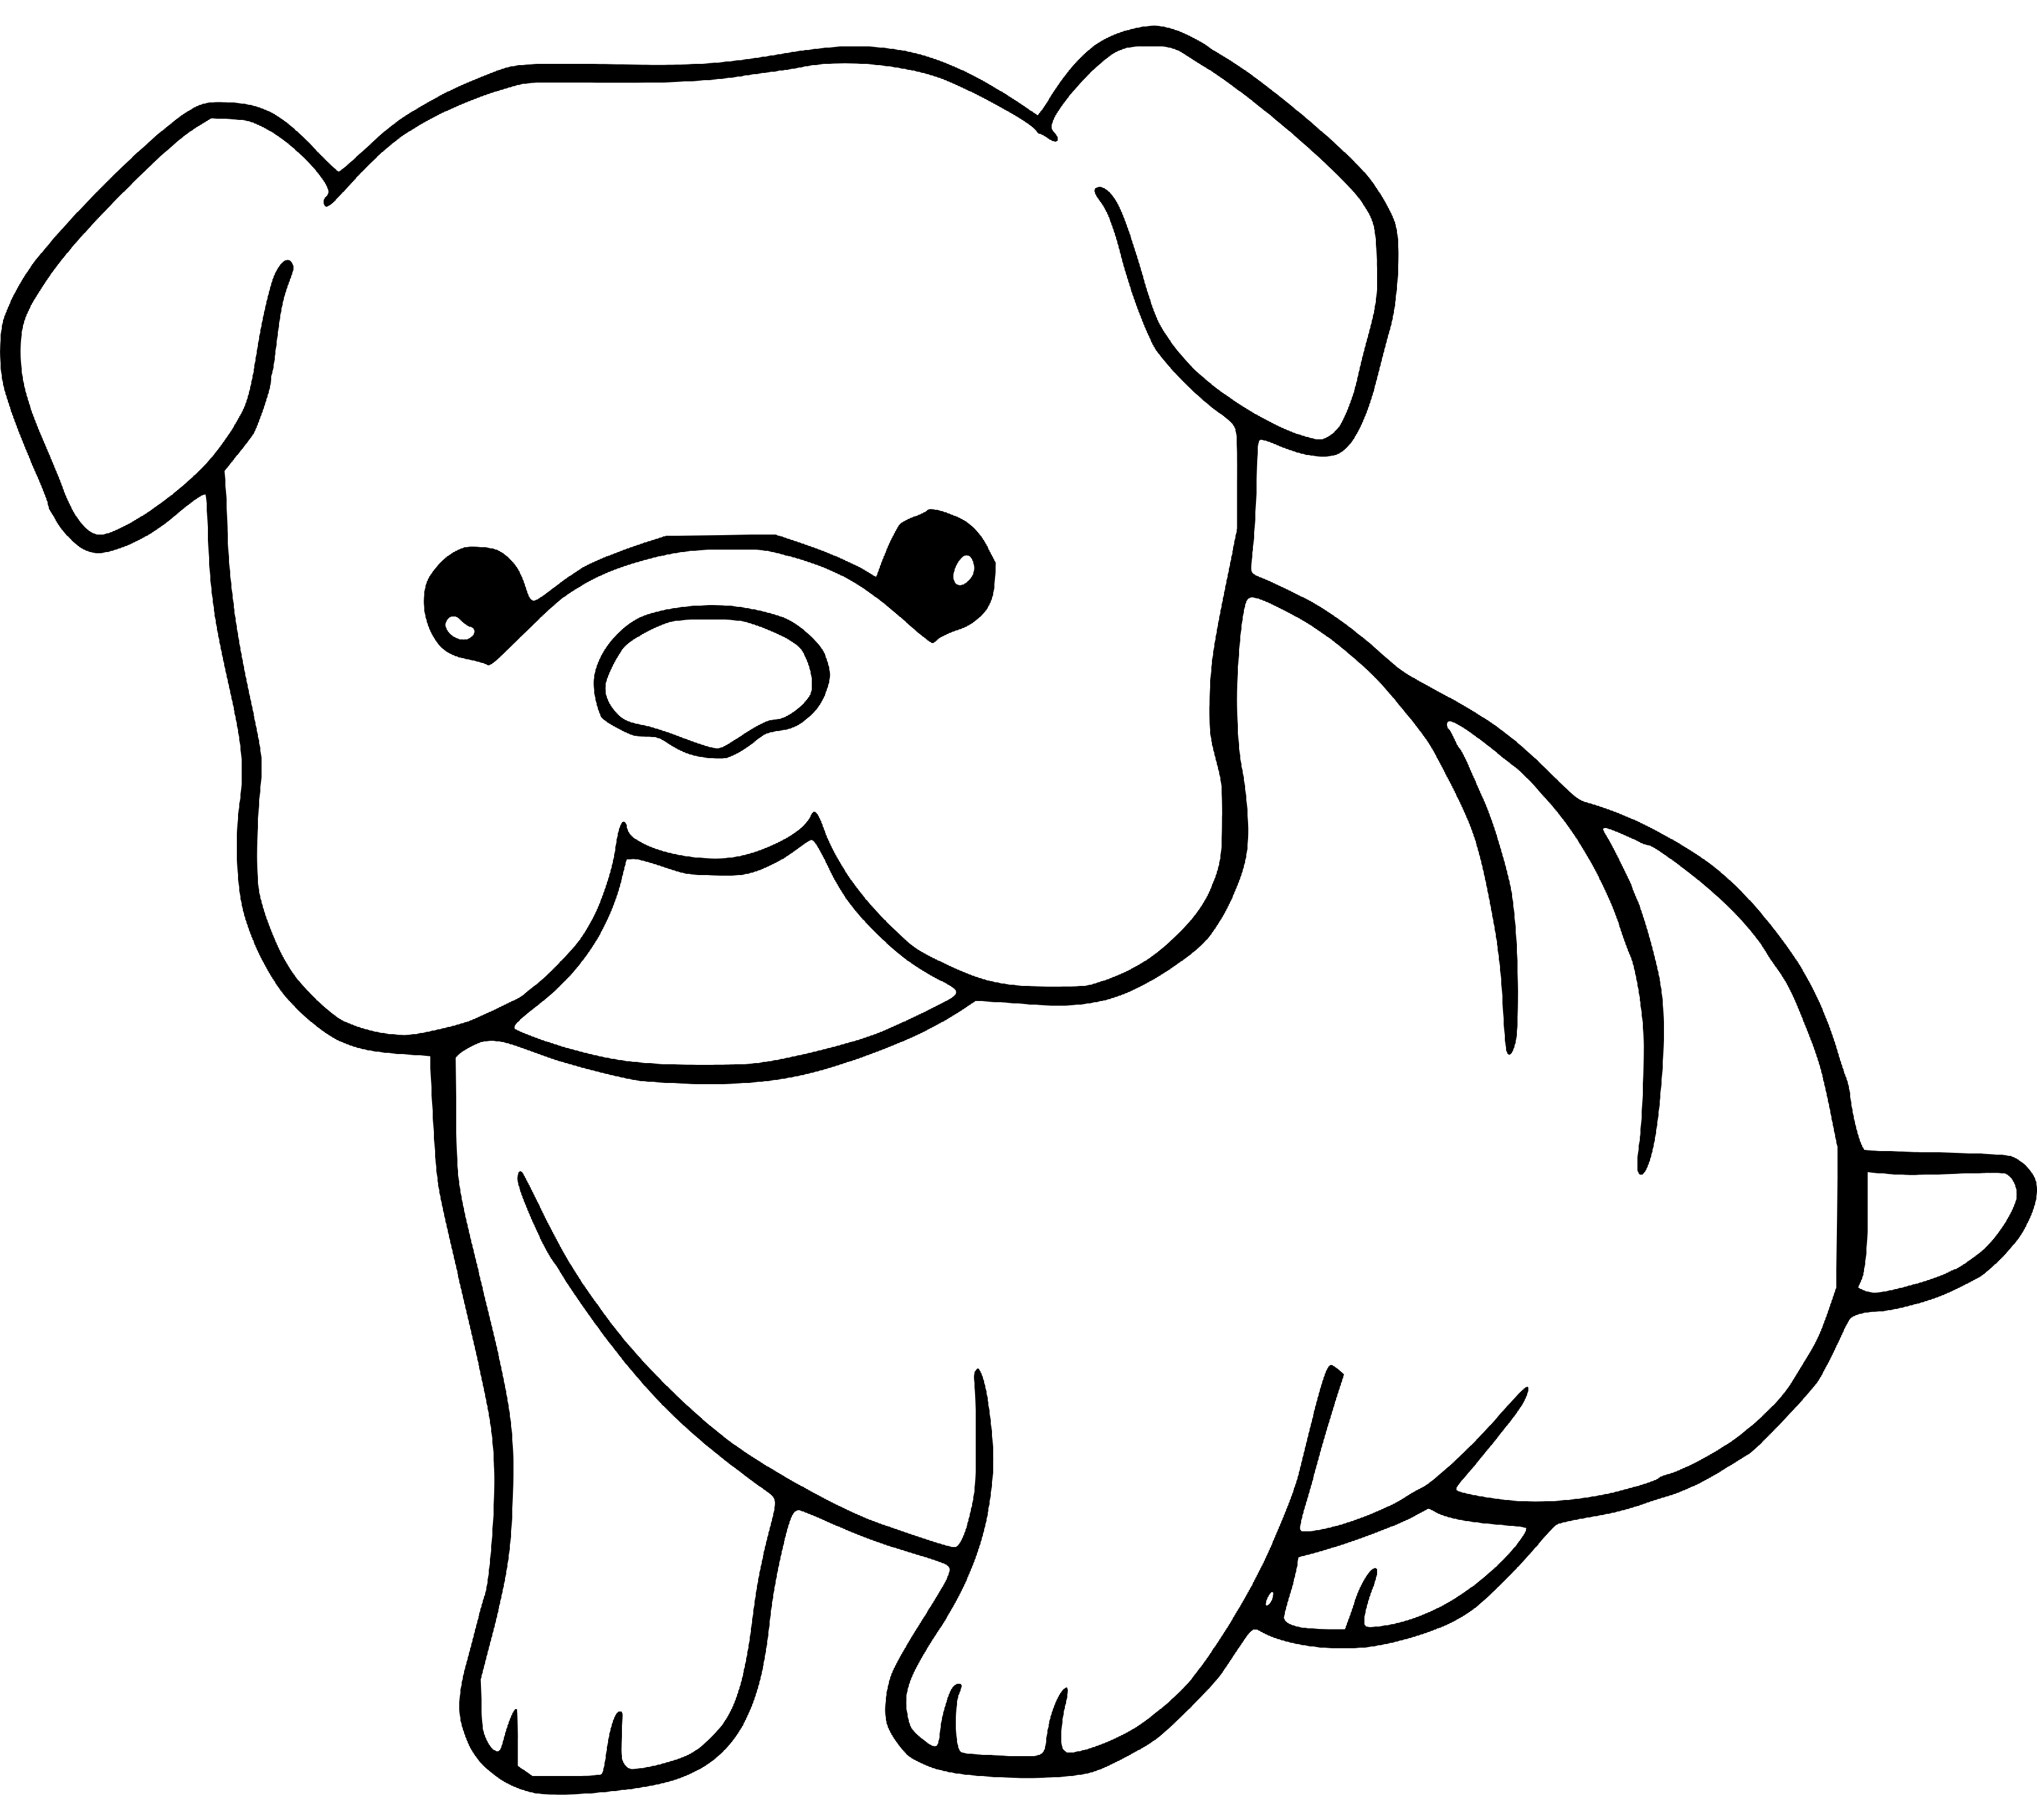 Cute Fat Puppy Coloring Page for Kids - SheetalColor.com